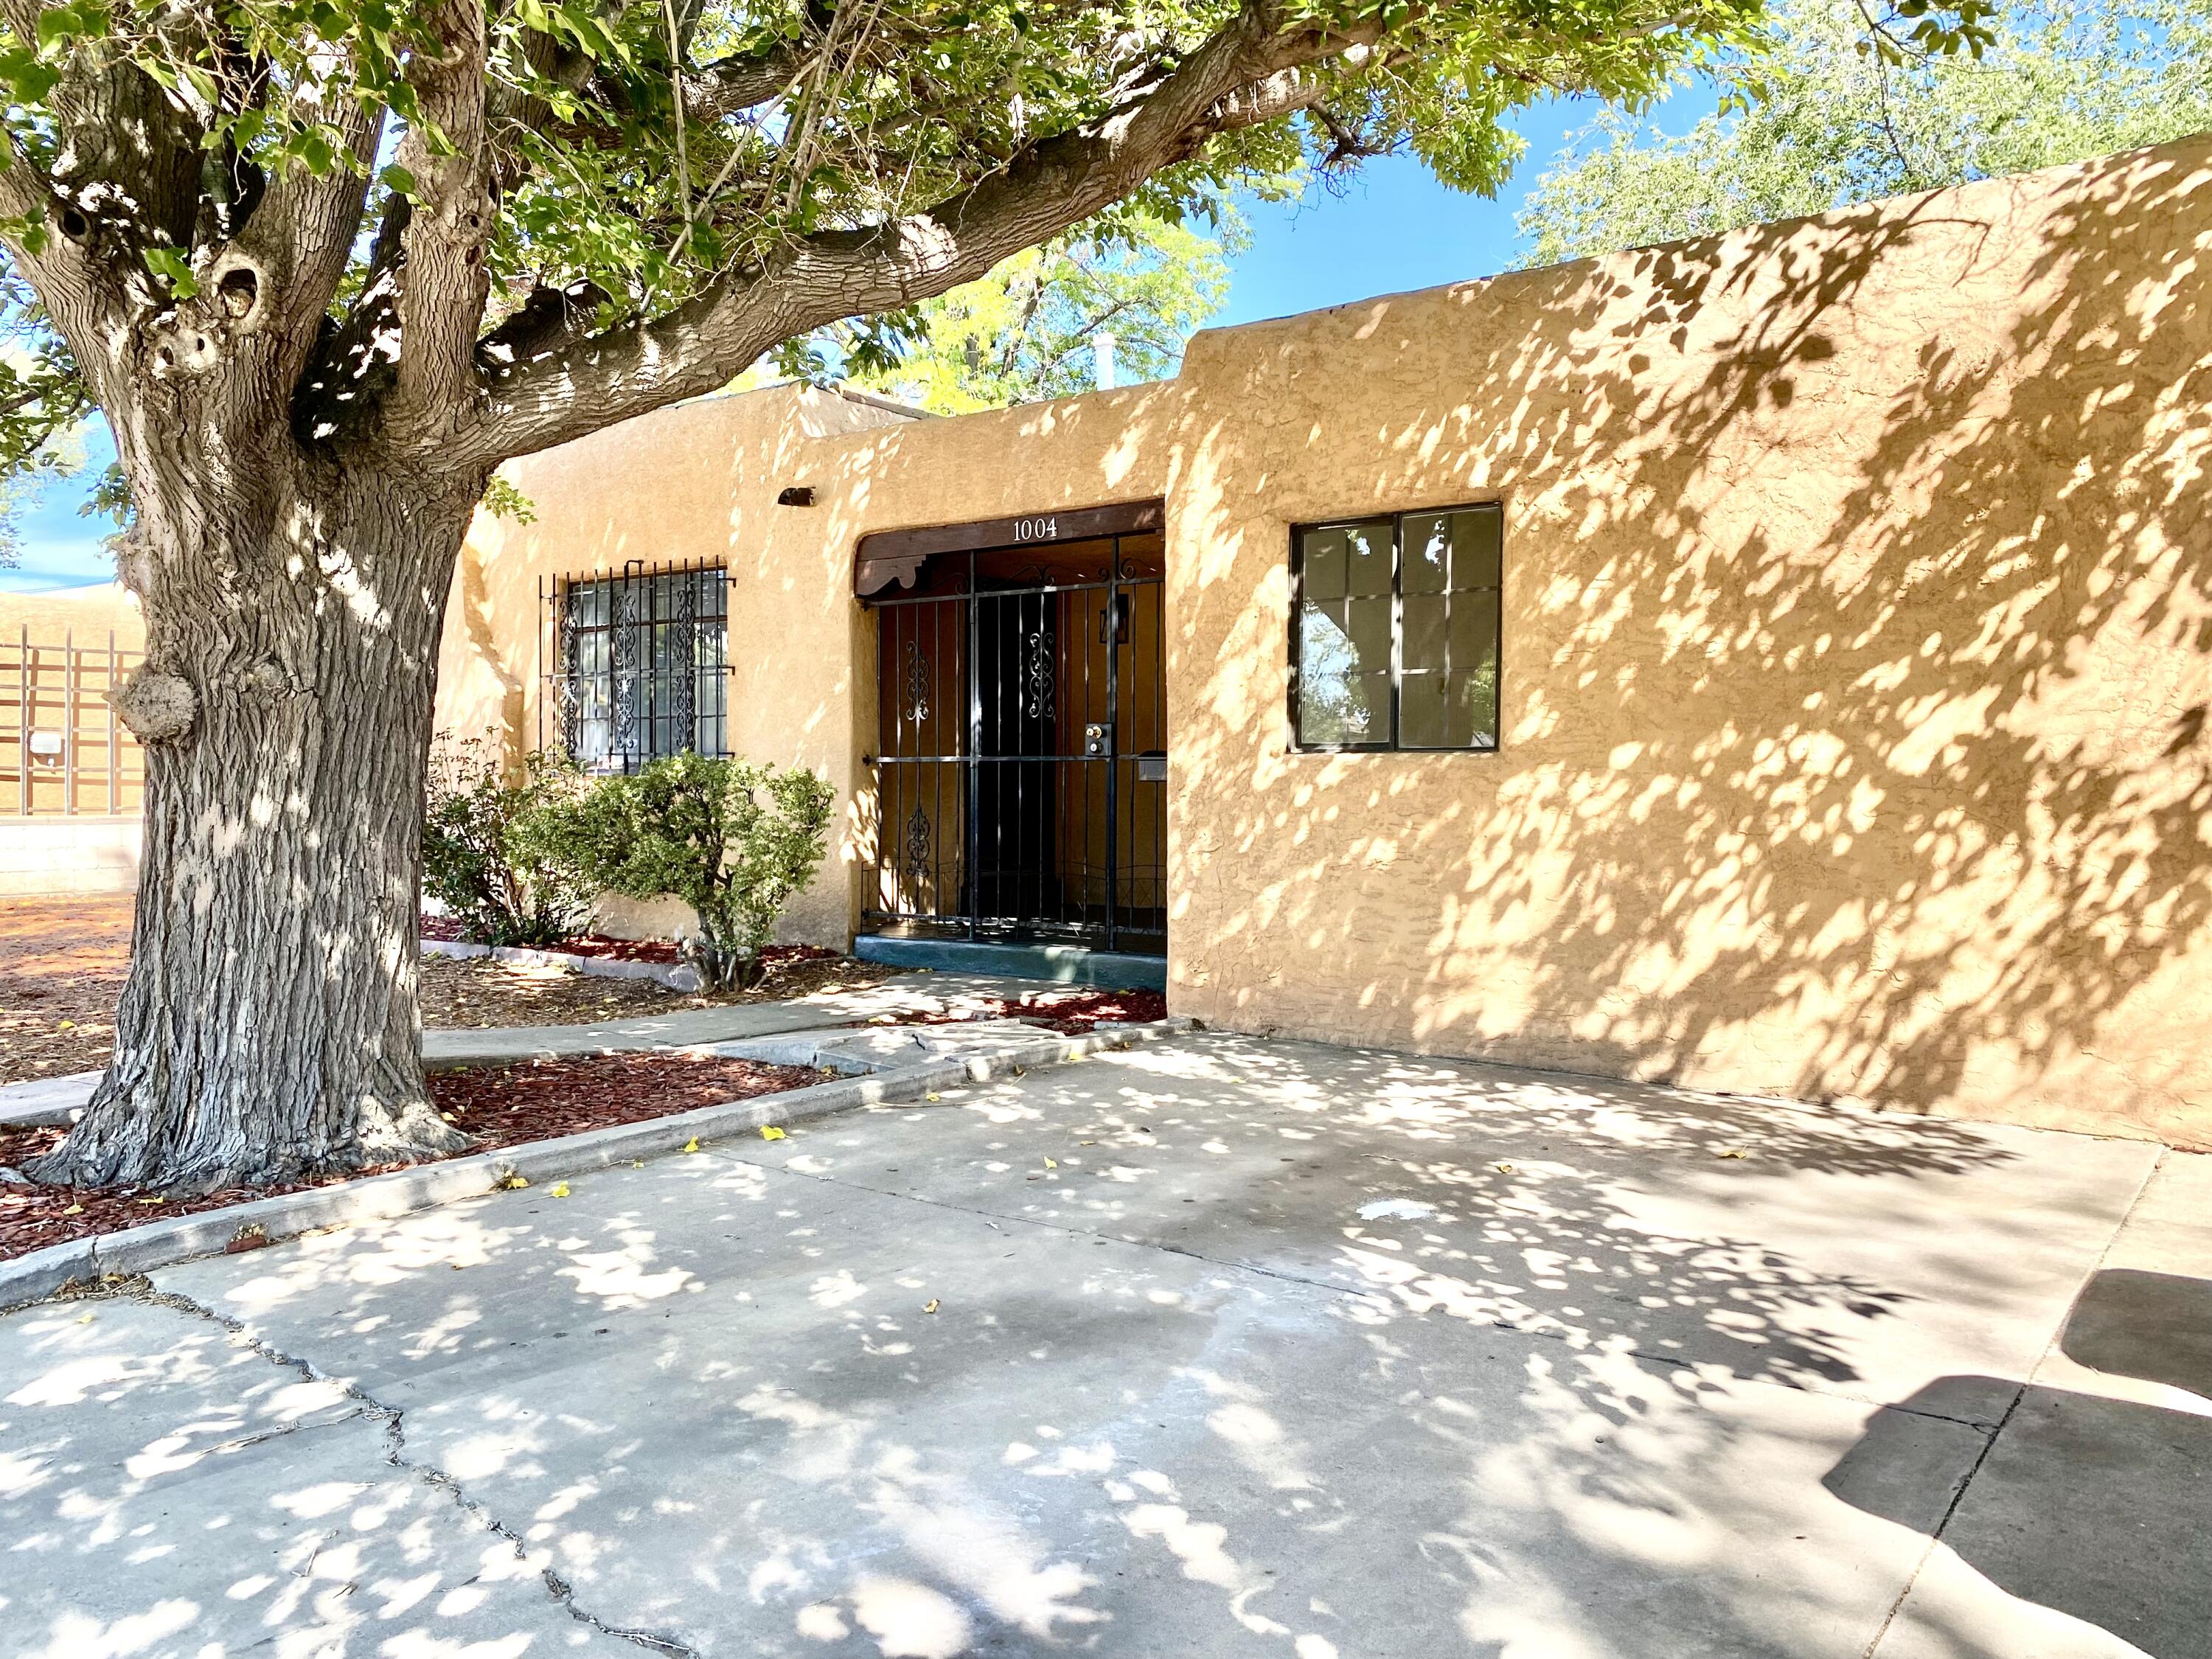 Near UNM Law and Medical Schools, parks within walking distance, minutes from downtown or uptown. This 4-bedroom home has stunning hardwood floors, a contemporary fireplace for those chilly nights, updated kitchen and bathrooms, new lighting and plumbing fixtures.  The bedrooms are spacious. The Kitchen features plenty of cabinet and countertop space. Sit in the oversized covered front patio to watch the sunset or sit in the shaded back yard covered patio. Large walled back yard with privacy is perfect for a pet.